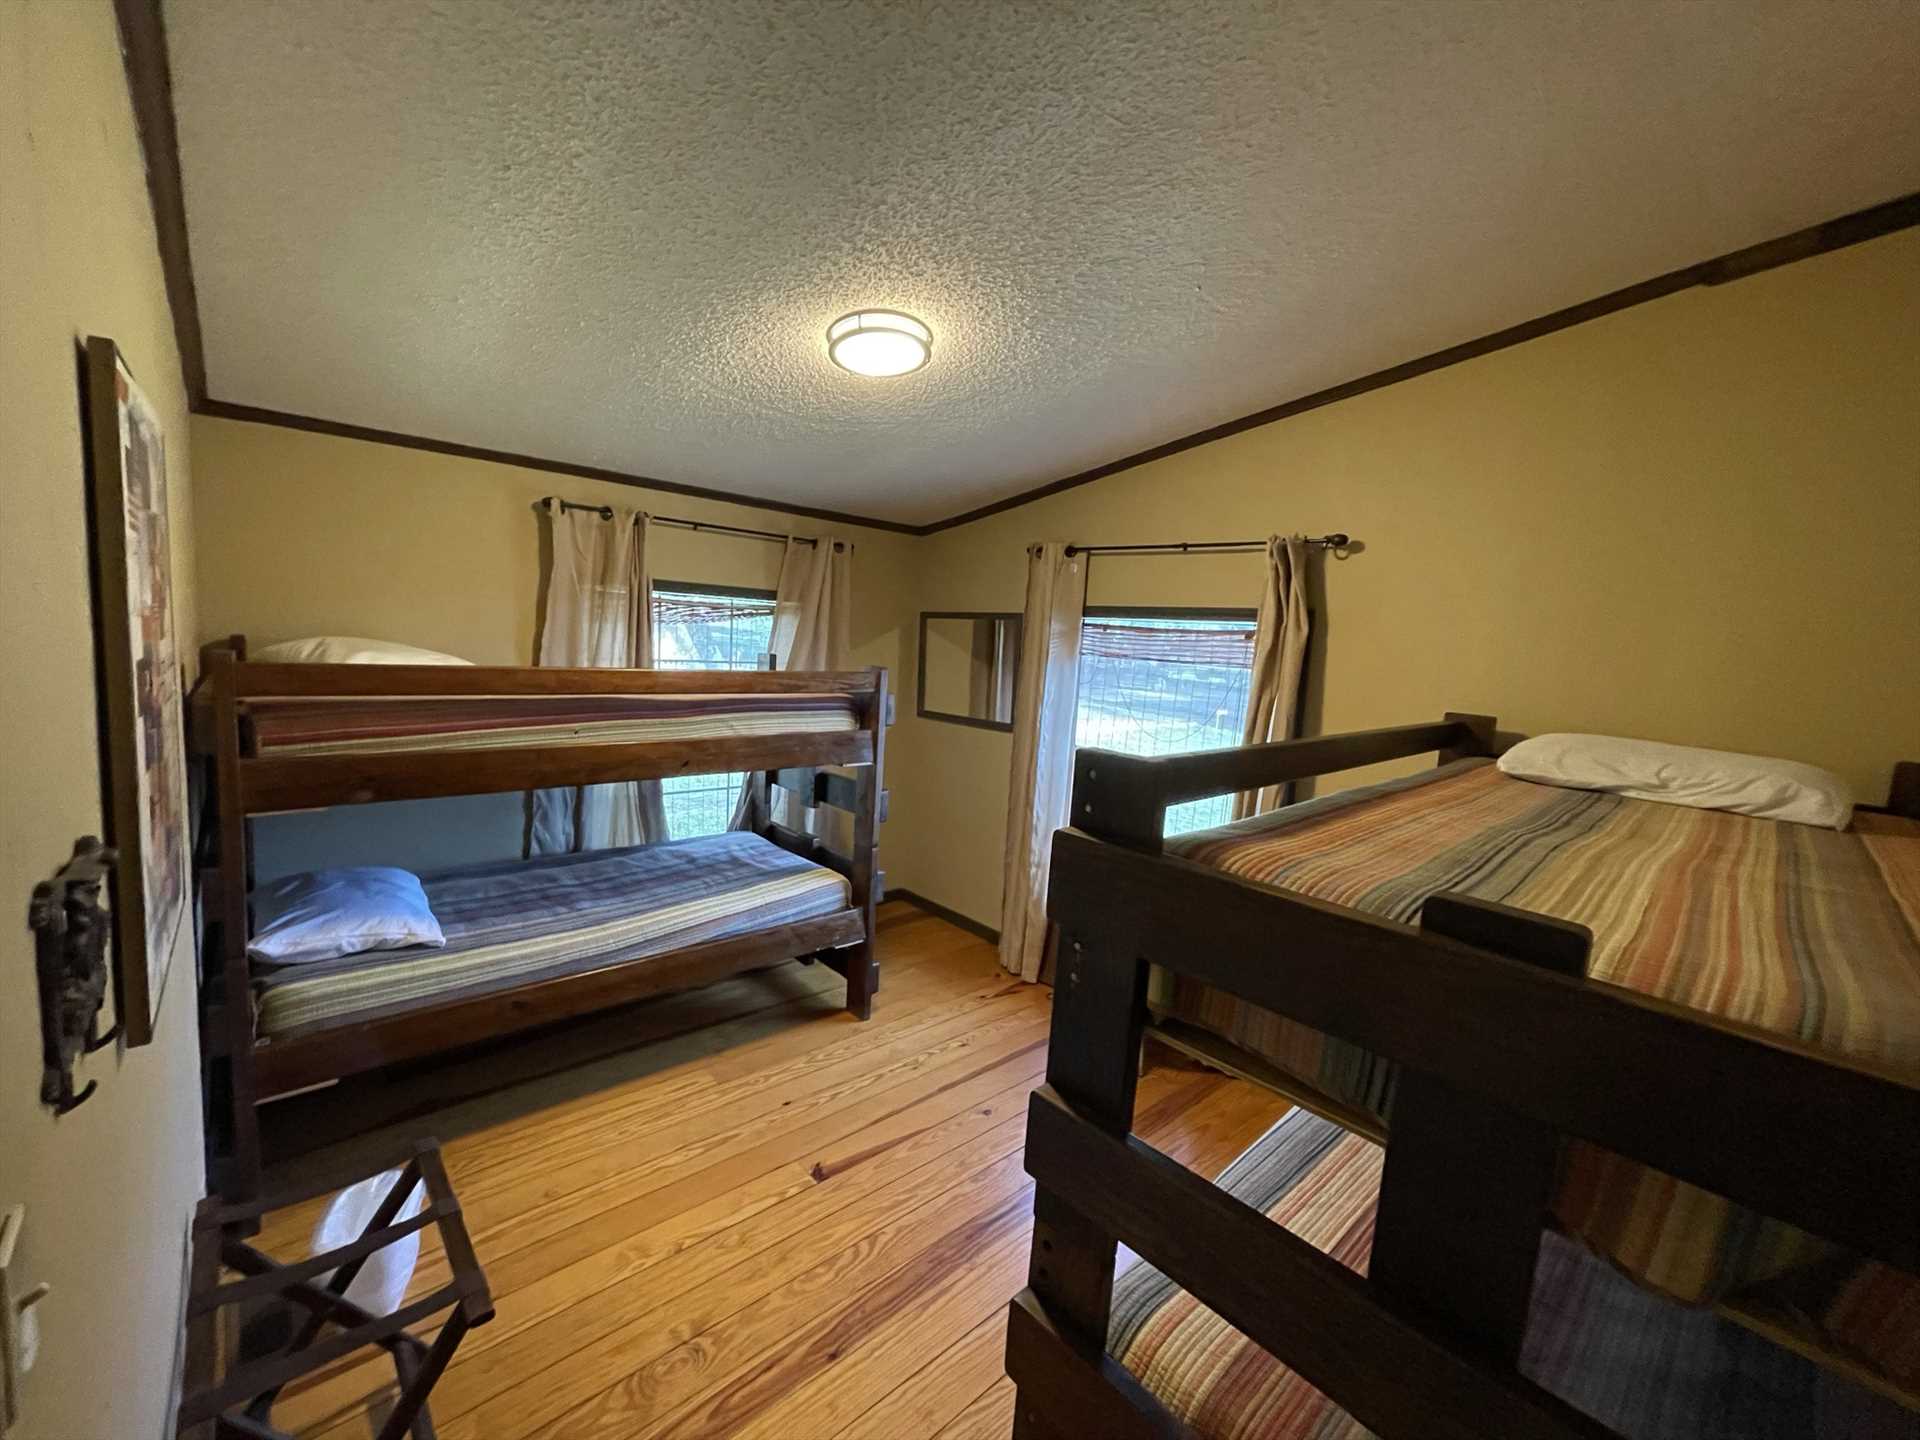                                                 Two sets of twin bunk beds can be found in the second bedroom at Rio Vista, offering comfortable sleeping accommodations for up to four in this guest home.